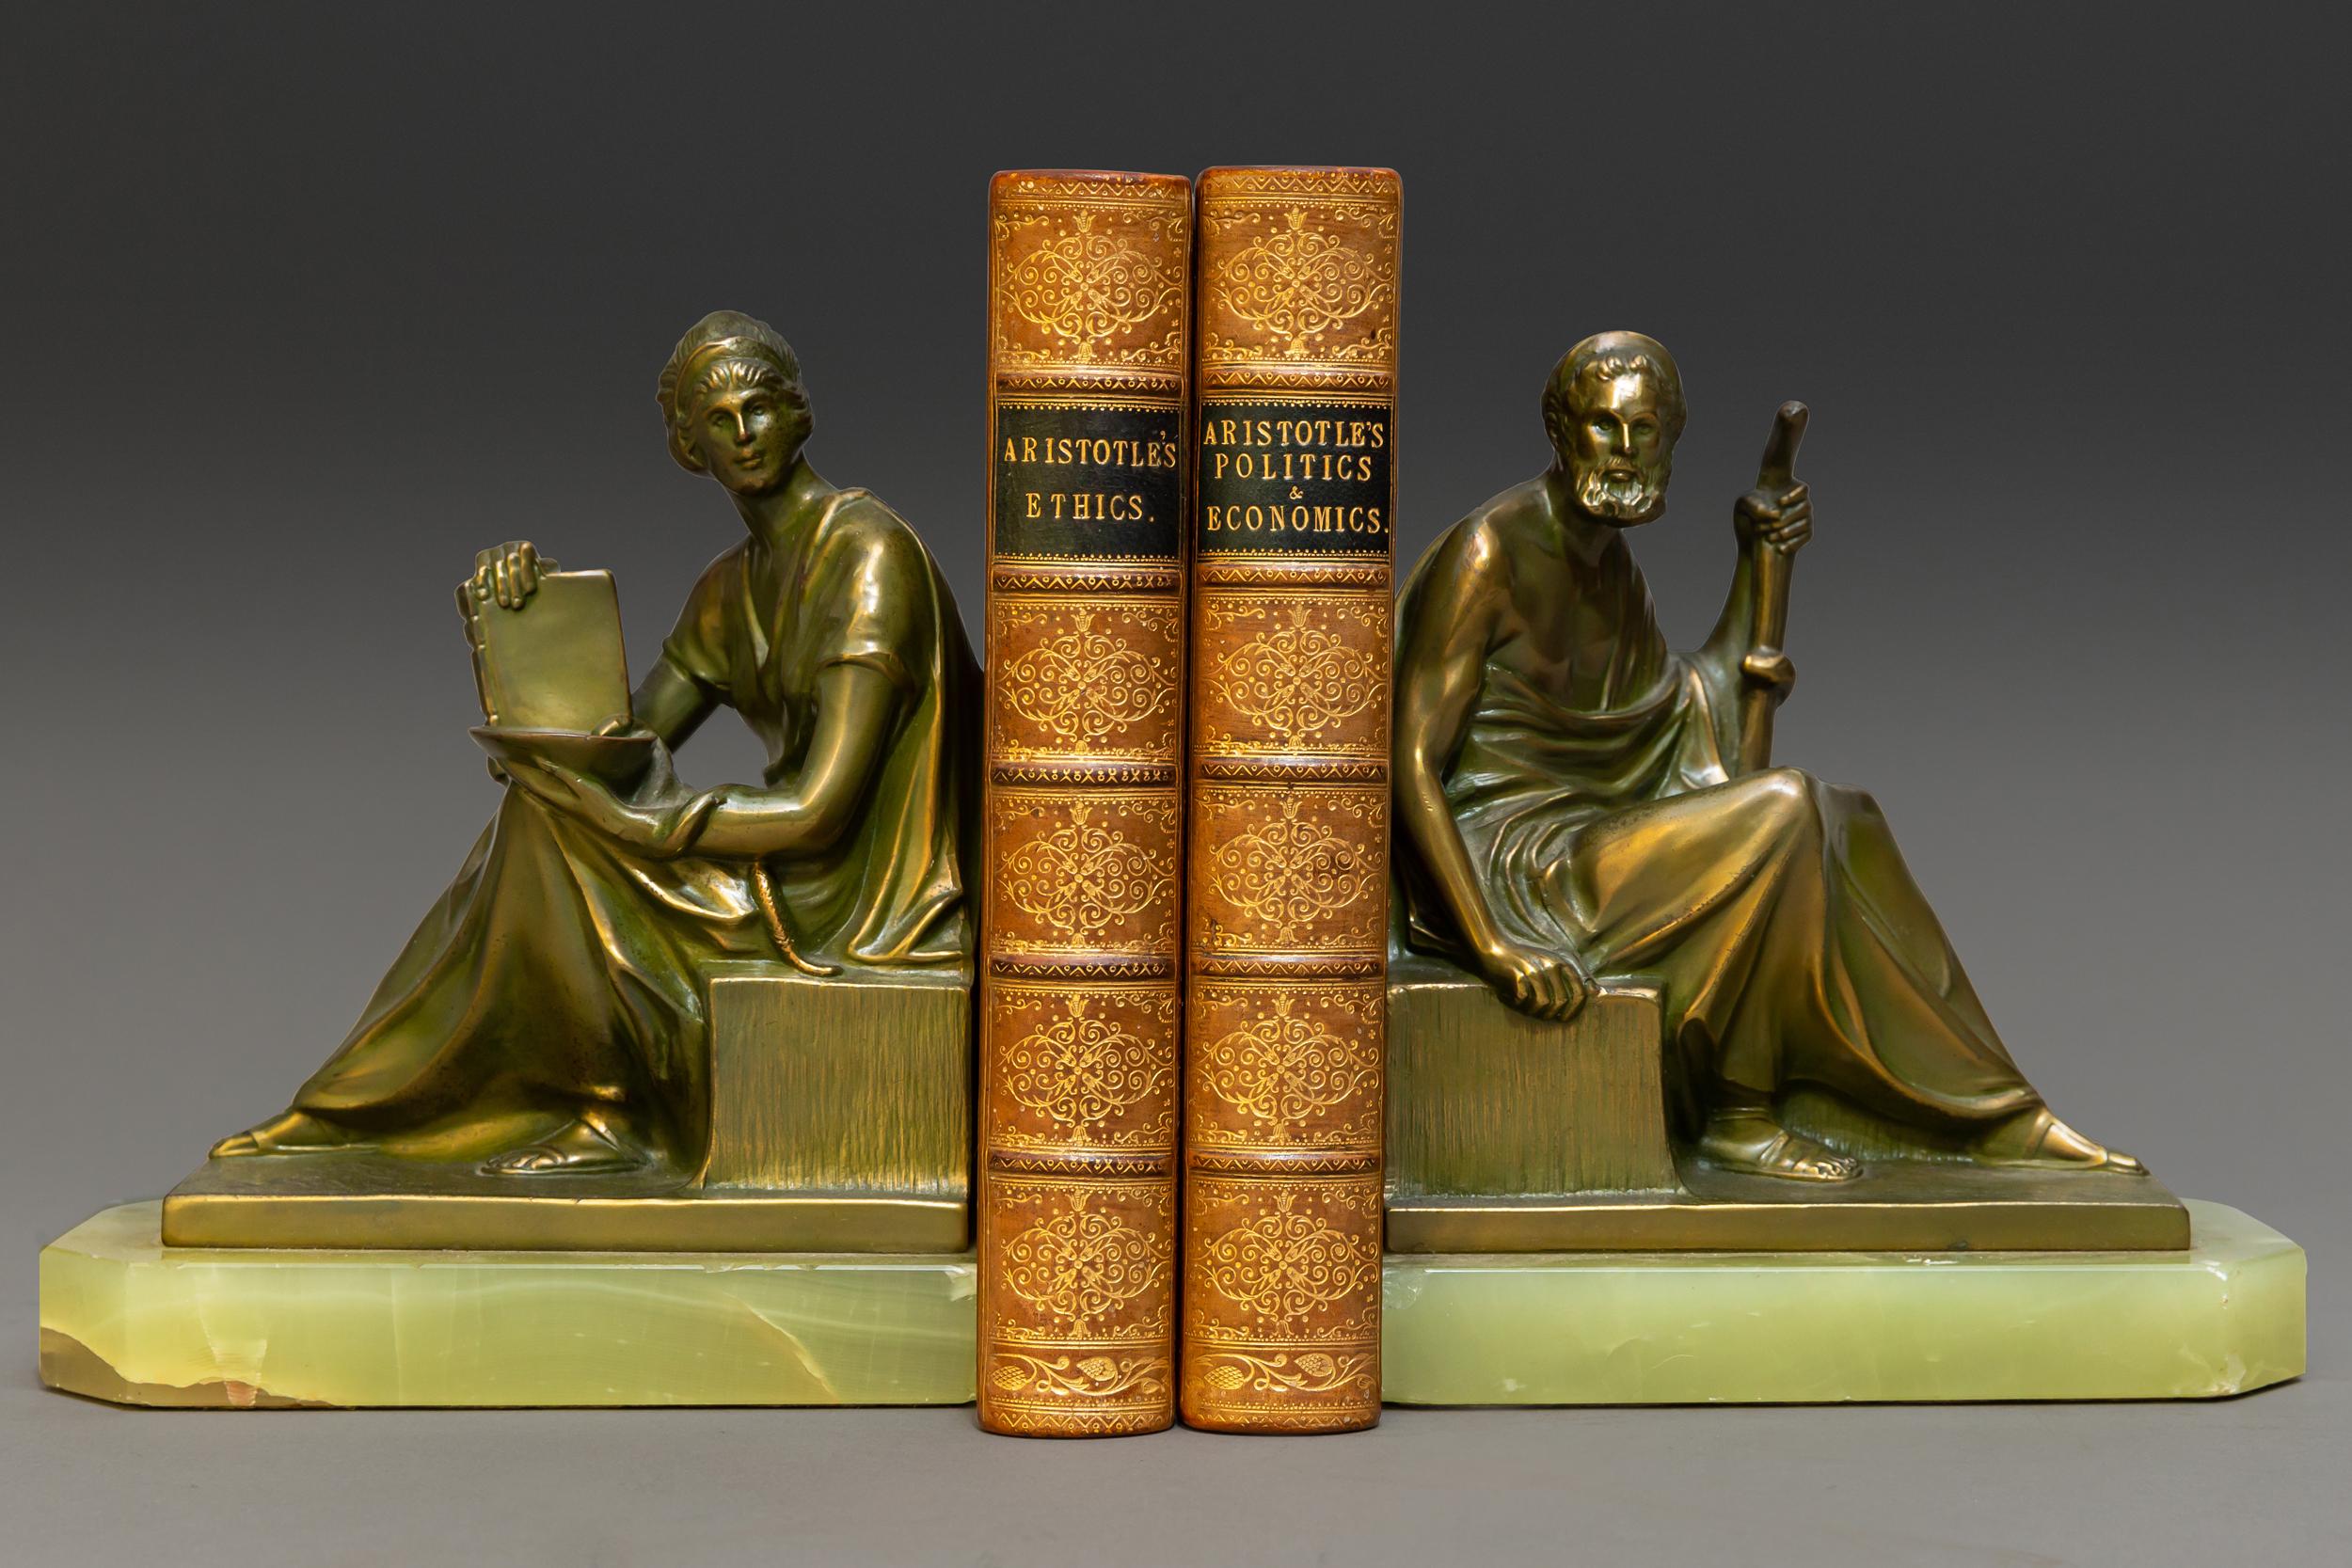 2 Vols.

Bound in 3/4 Tan Calf, Marbled Boards and Edges, Raised Bands,
Ornate Gilt On Spines. Published: London: Bell and Daldy 1866 and 1867 

Measures: H 7”, D 4 3/4”, W 1”.